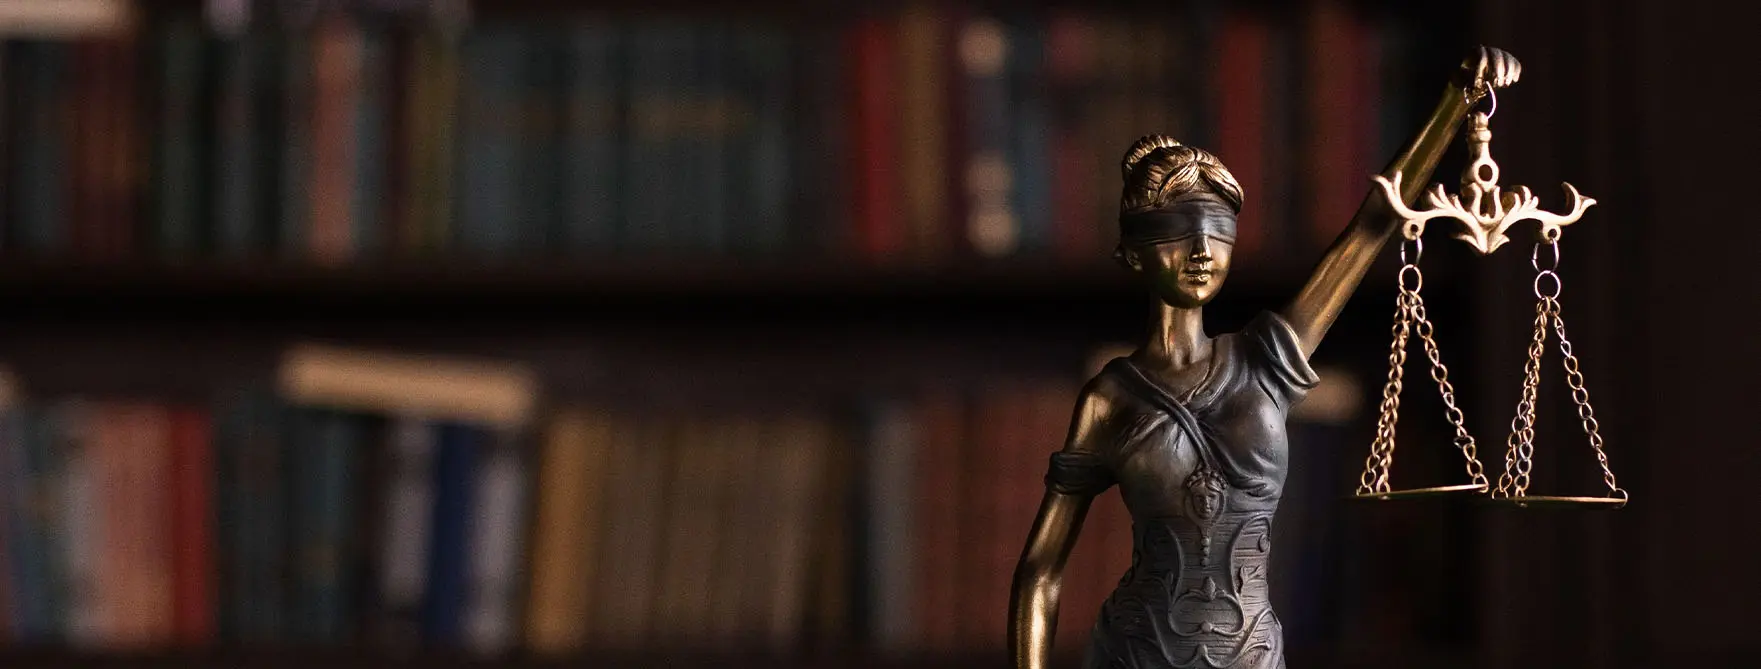 A Lady Justice statue in front of a bookshelf